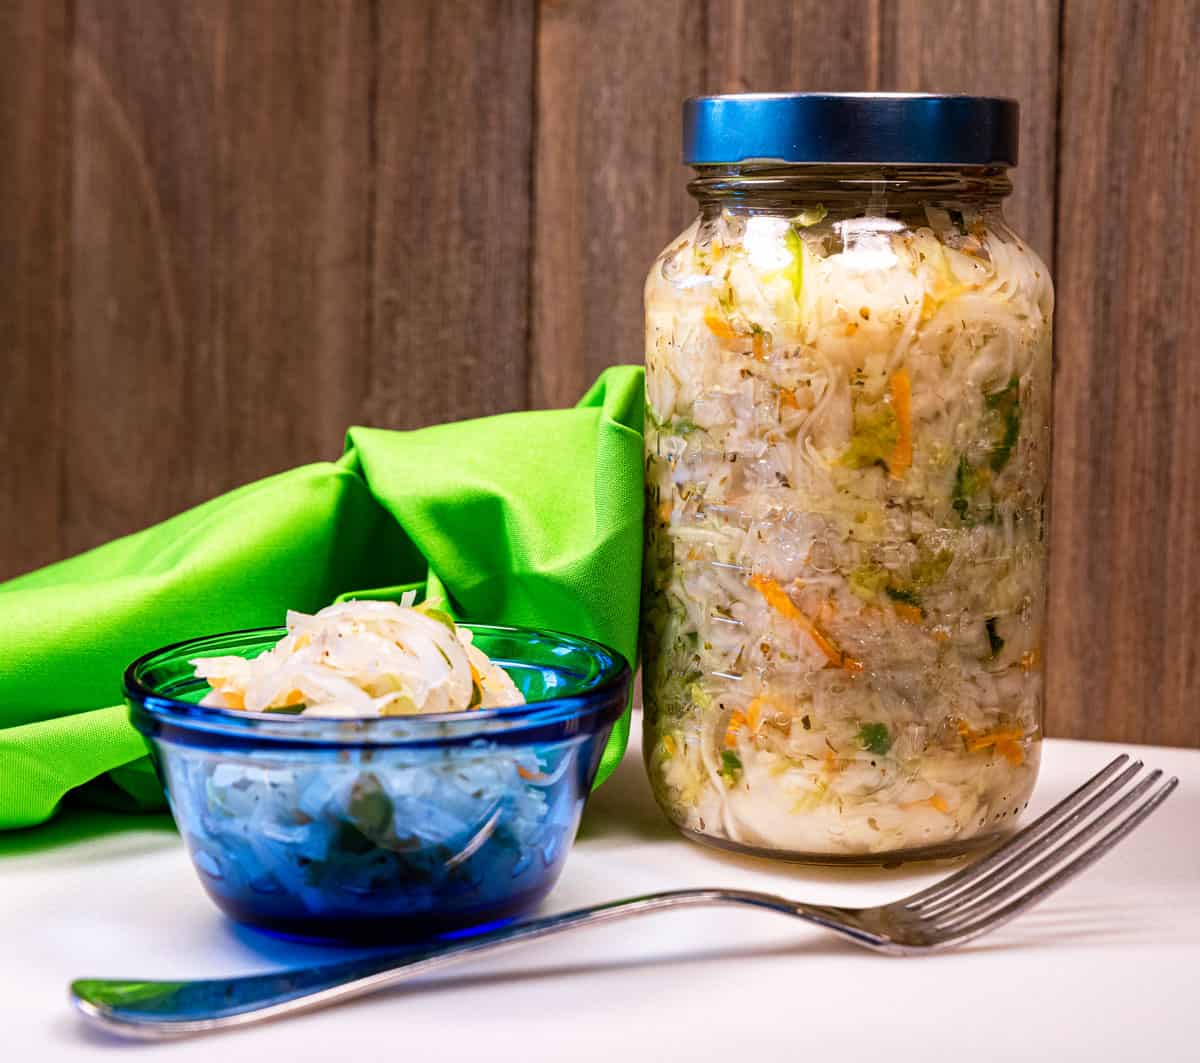 A small blue dish of salvadoran curtido slaw with a fork and mason jar of it next to it.